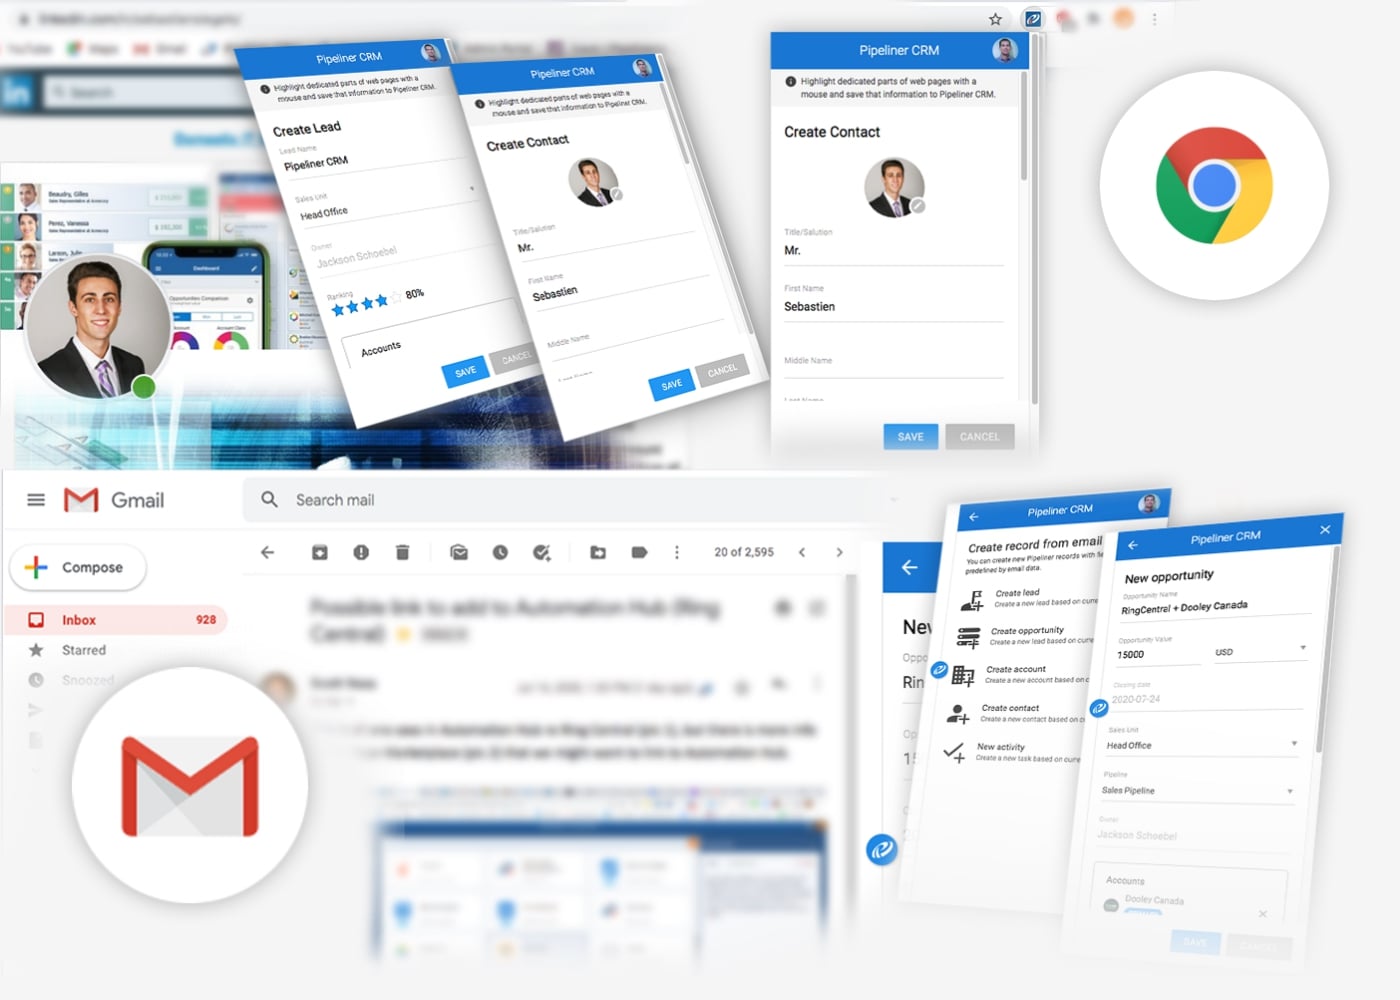 Google Chrome Extension integration with Pipeliner CRM